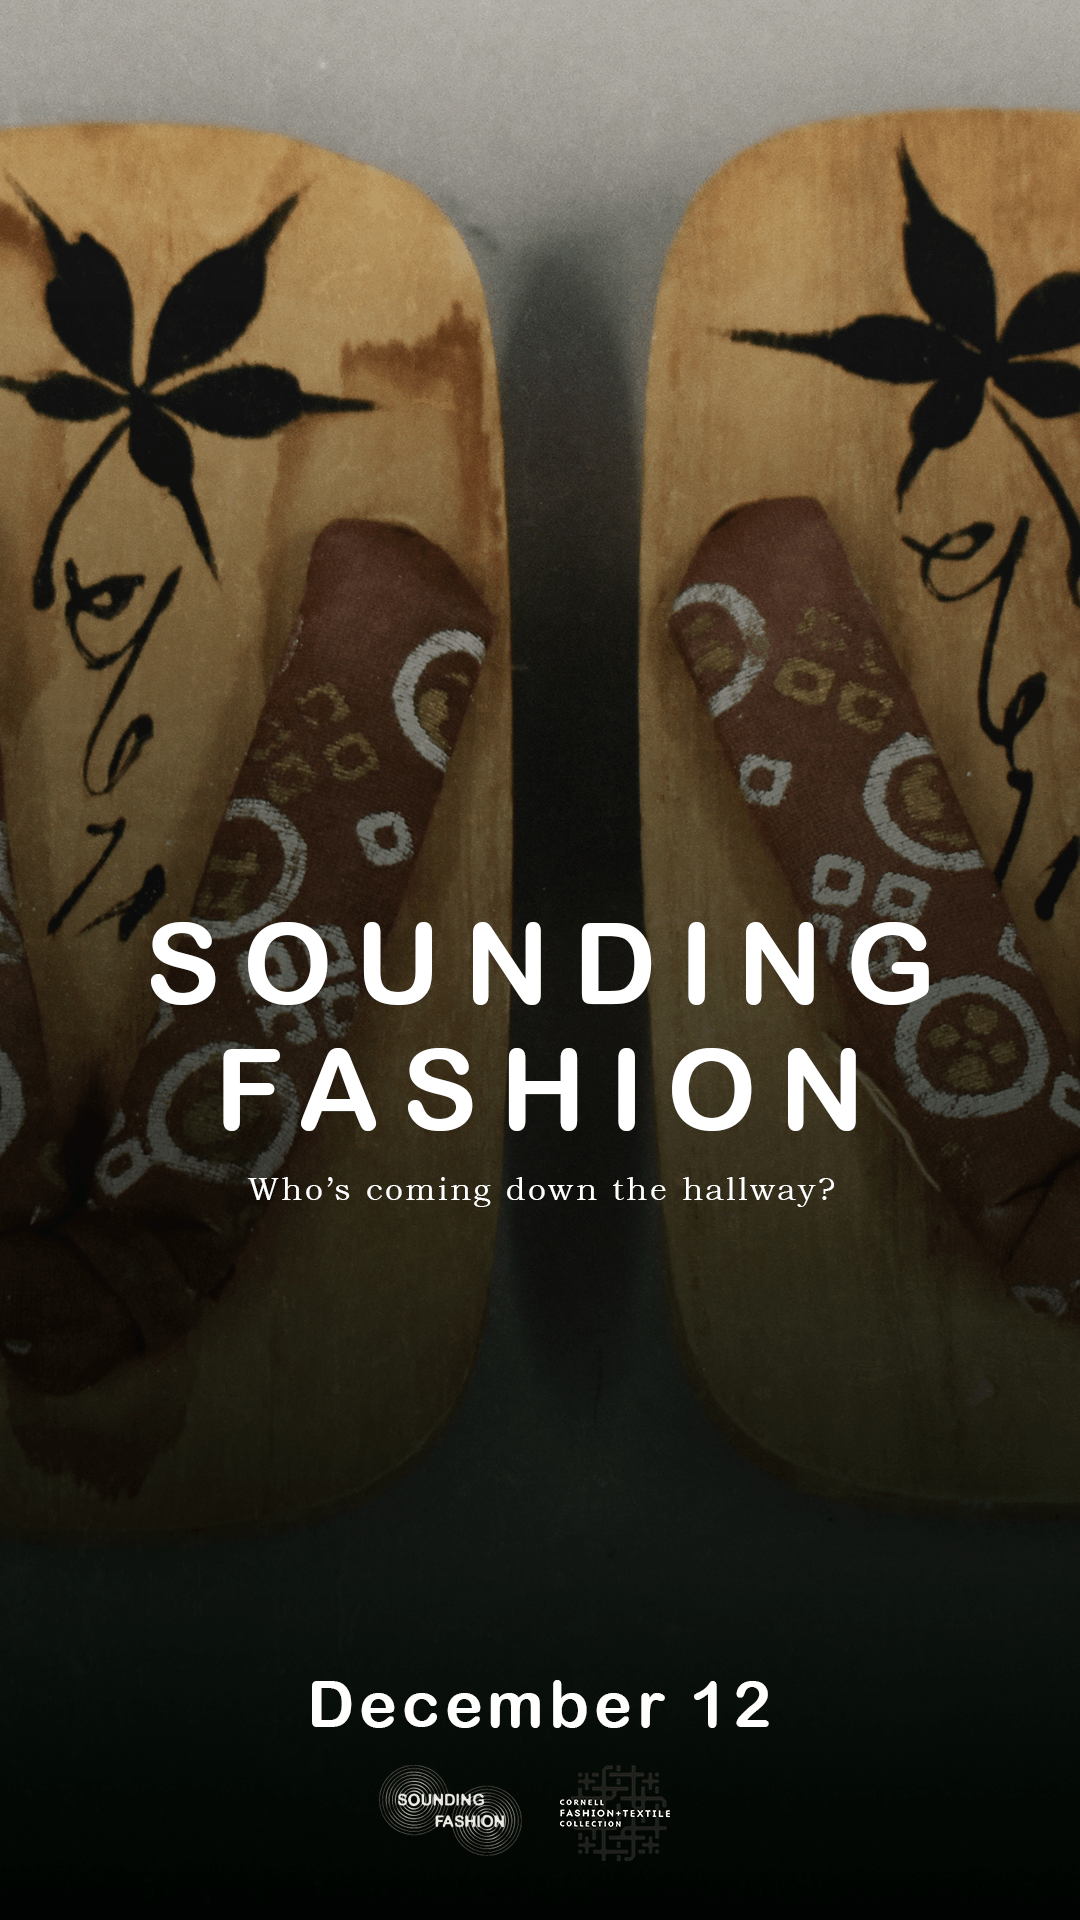 A pair of geta shoes with text that says "Sounding Fashion: Who's Coming Down the Hallway?"